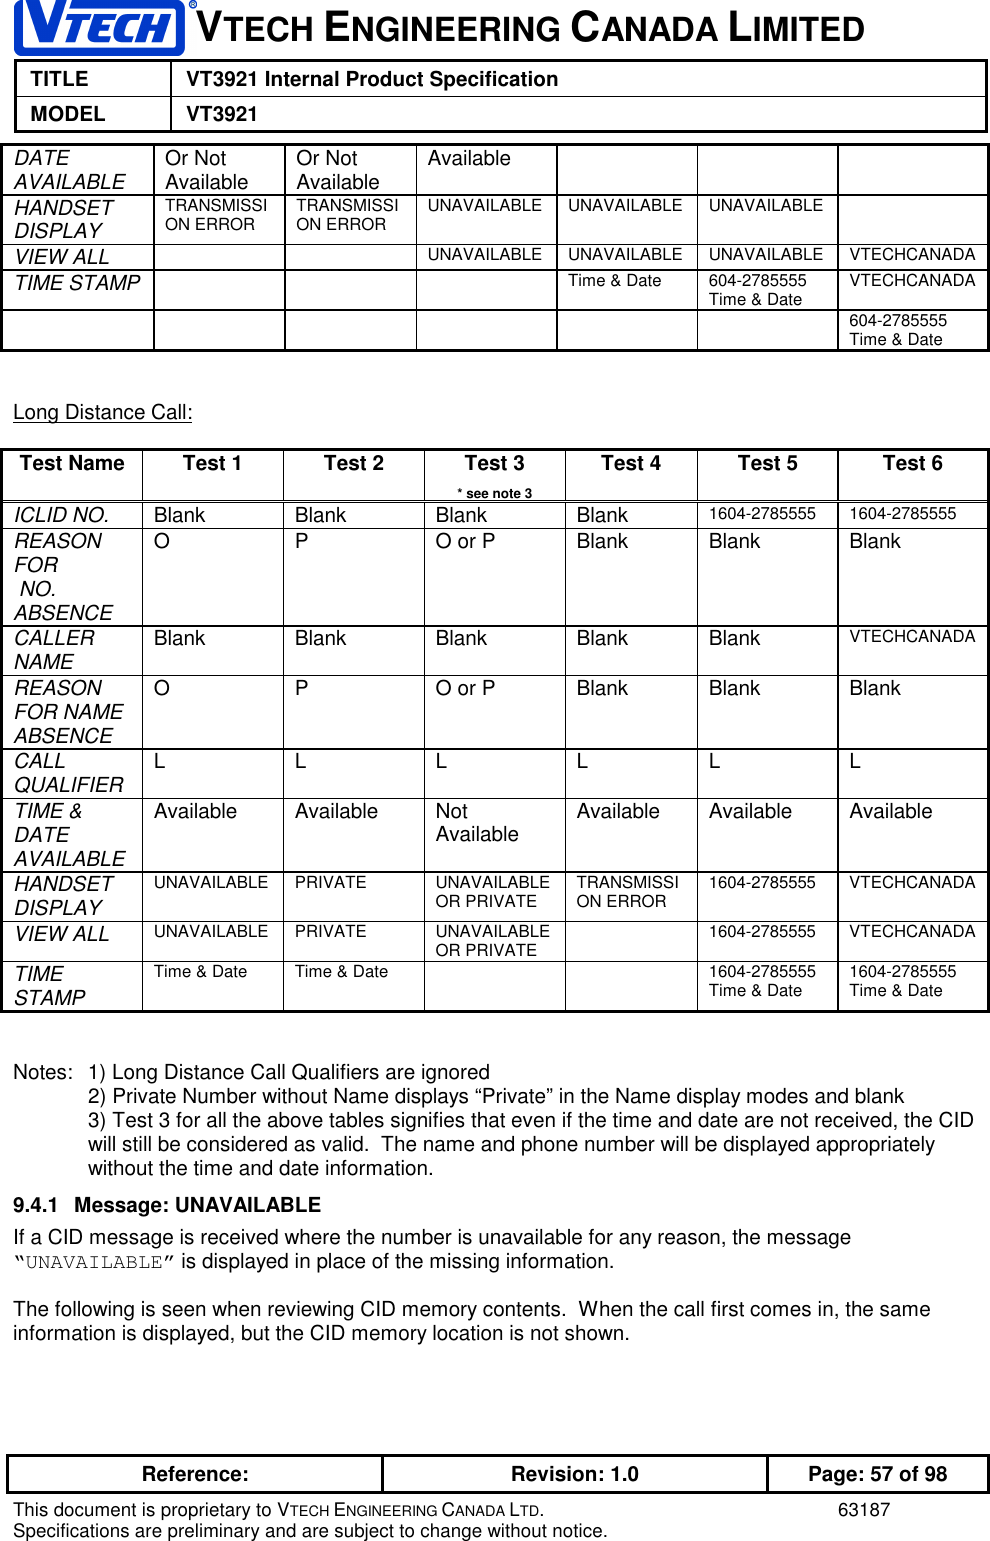 VTECH ENGINEERING CANADA LIMITEDTITLE VT3921 Internal Product SpecificationMODEL VT3921Reference: Revision: 1.0 Page: 57 of 98This document is proprietary to VTECH ENGINEERING CANADA LTD. 63187Specifications are preliminary and are subject to change without notice.DATEAVAILABLE Or NotAvailable Or NotAvailable AvailableHANDSETDISPLAYTRANSMISSION ERROR TRANSMISSION ERROR UNAVAILABLE UNAVAILABLE UNAVAILABLEVIEW ALL UNAVAILABLE UNAVAILABLE UNAVAILABLE VTECHCANADATIME STAMP Time &amp; Date 604-2785555Time &amp; Date VTECHCANADA604-2785555Time &amp; DateLong Distance Call:Test Name Test 1 Test 2 Test 3* see note 3Test 4 Test 5 Test 6ICLID NO. Blank Blank Blank Blank 1604-2785555 1604-2785555REASONFOR NO.ABSENCEO P O or P Blank Blank BlankCALLERNAME Blank Blank Blank Blank Blank VTECHCANADAREASONFOR NAMEABSENCEO P O or P Blank Blank BlankCALLQUALIFIER LLLLLLTIME &amp;DATEAVAILABLEAvailable Available NotAvailable Available Available AvailableHANDSETDISPLAYUNAVAILABLE PRIVATE UNAVAILABLEOR PRIVATE TRANSMISSION ERROR 1604-2785555 VTECHCANADAVIEW ALL UNAVAILABLE PRIVATE UNAVAILABLEOR PRIVATE 1604-2785555 VTECHCANADATIMESTAMPTime &amp; Date Time &amp; Date 1604-2785555Time &amp; Date 1604-2785555Time &amp; DateNotes: 1) Long Distance Call Qualifiers are ignored2) Private Number without Name displays “Private” in the Name display modes and blank3) Test 3 for all the above tables signifies that even if the time and date are not received, the CIDwill still be considered as valid.  The name and phone number will be displayed appropriatelywithout the time and date information.9.4.1 Message: UNAVAILABLEIf a CID message is received where the number is unavailable for any reason, the message“UNAVAILABLE” is displayed in place of the missing information.The following is seen when reviewing CID memory contents.  When the call first comes in, the sameinformation is displayed, but the CID memory location is not shown.